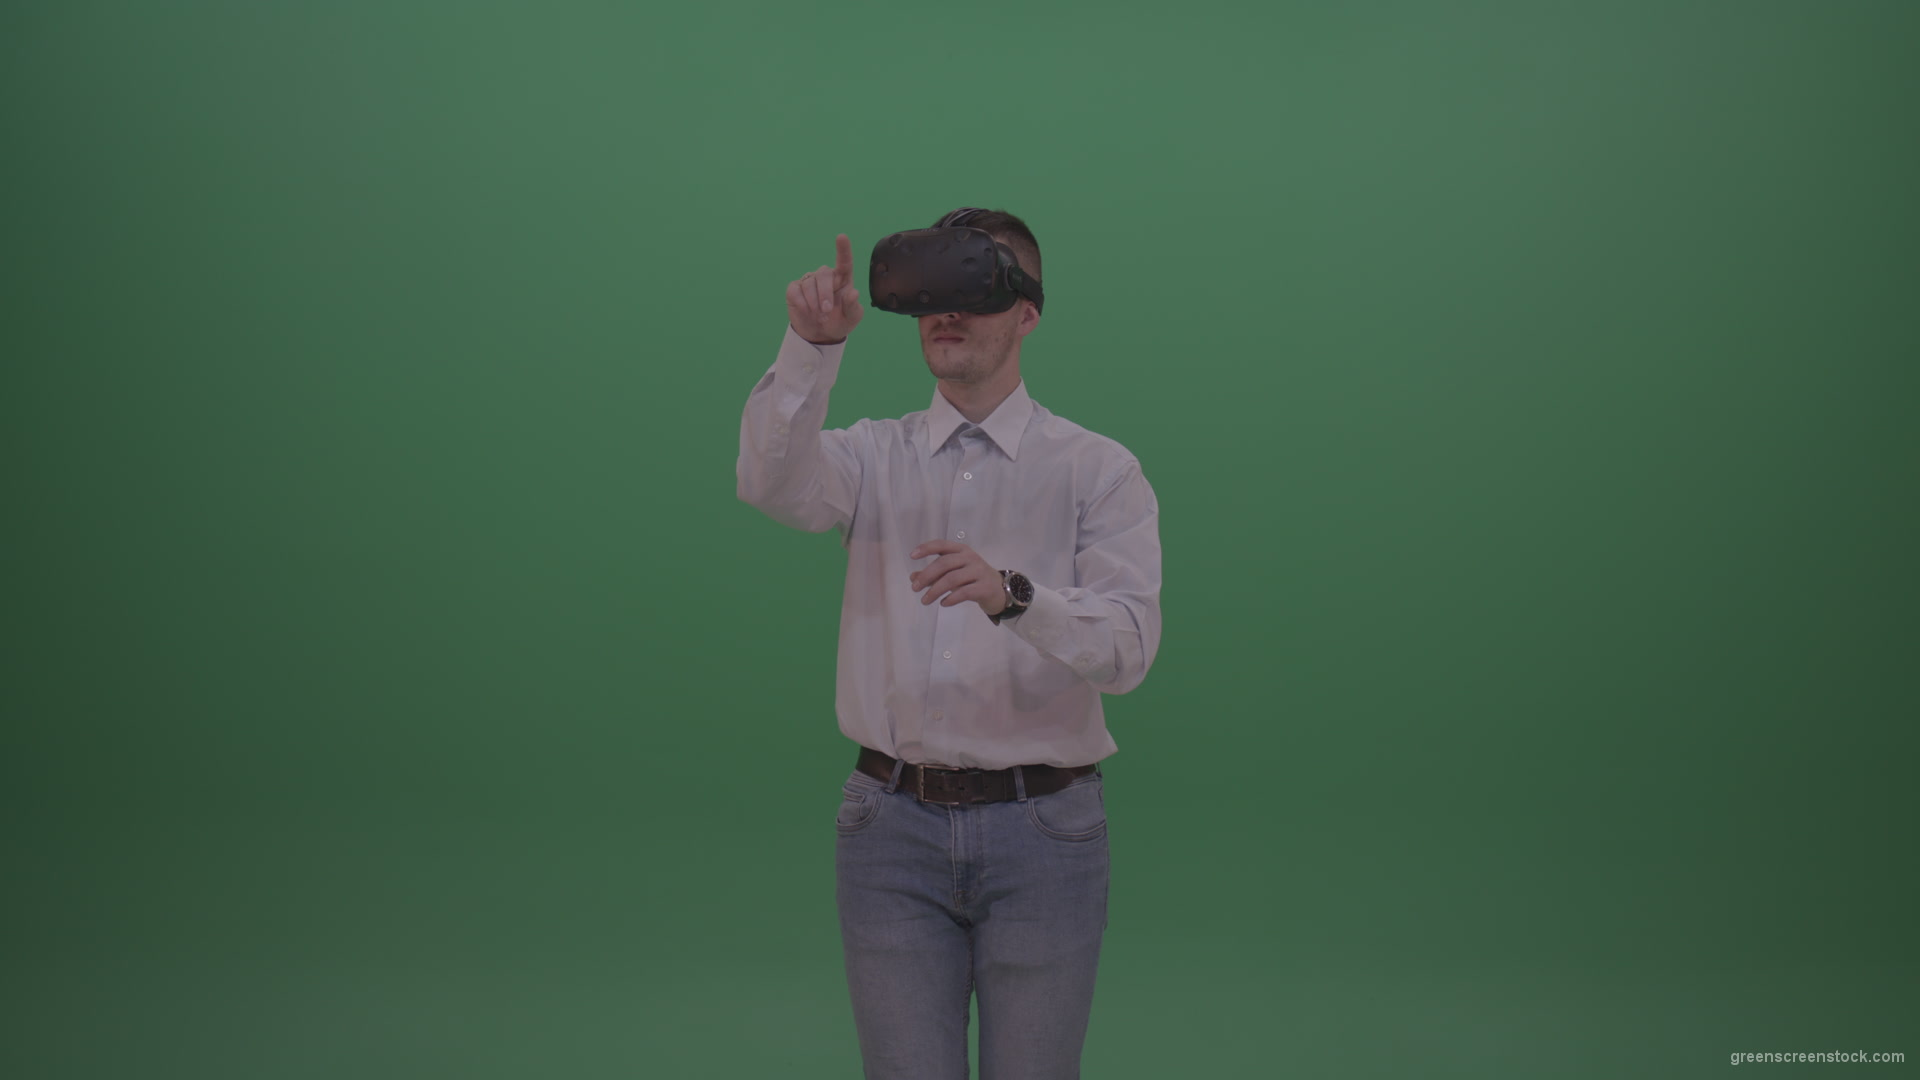 Young_Handsome_Man_With_Black_Hair_Wearing_White_Shirt_Using_Virtual_Glasses_Clicking_Touch_Pad_On_Green_Screen_Background_Wall_002 Green Screen Stock